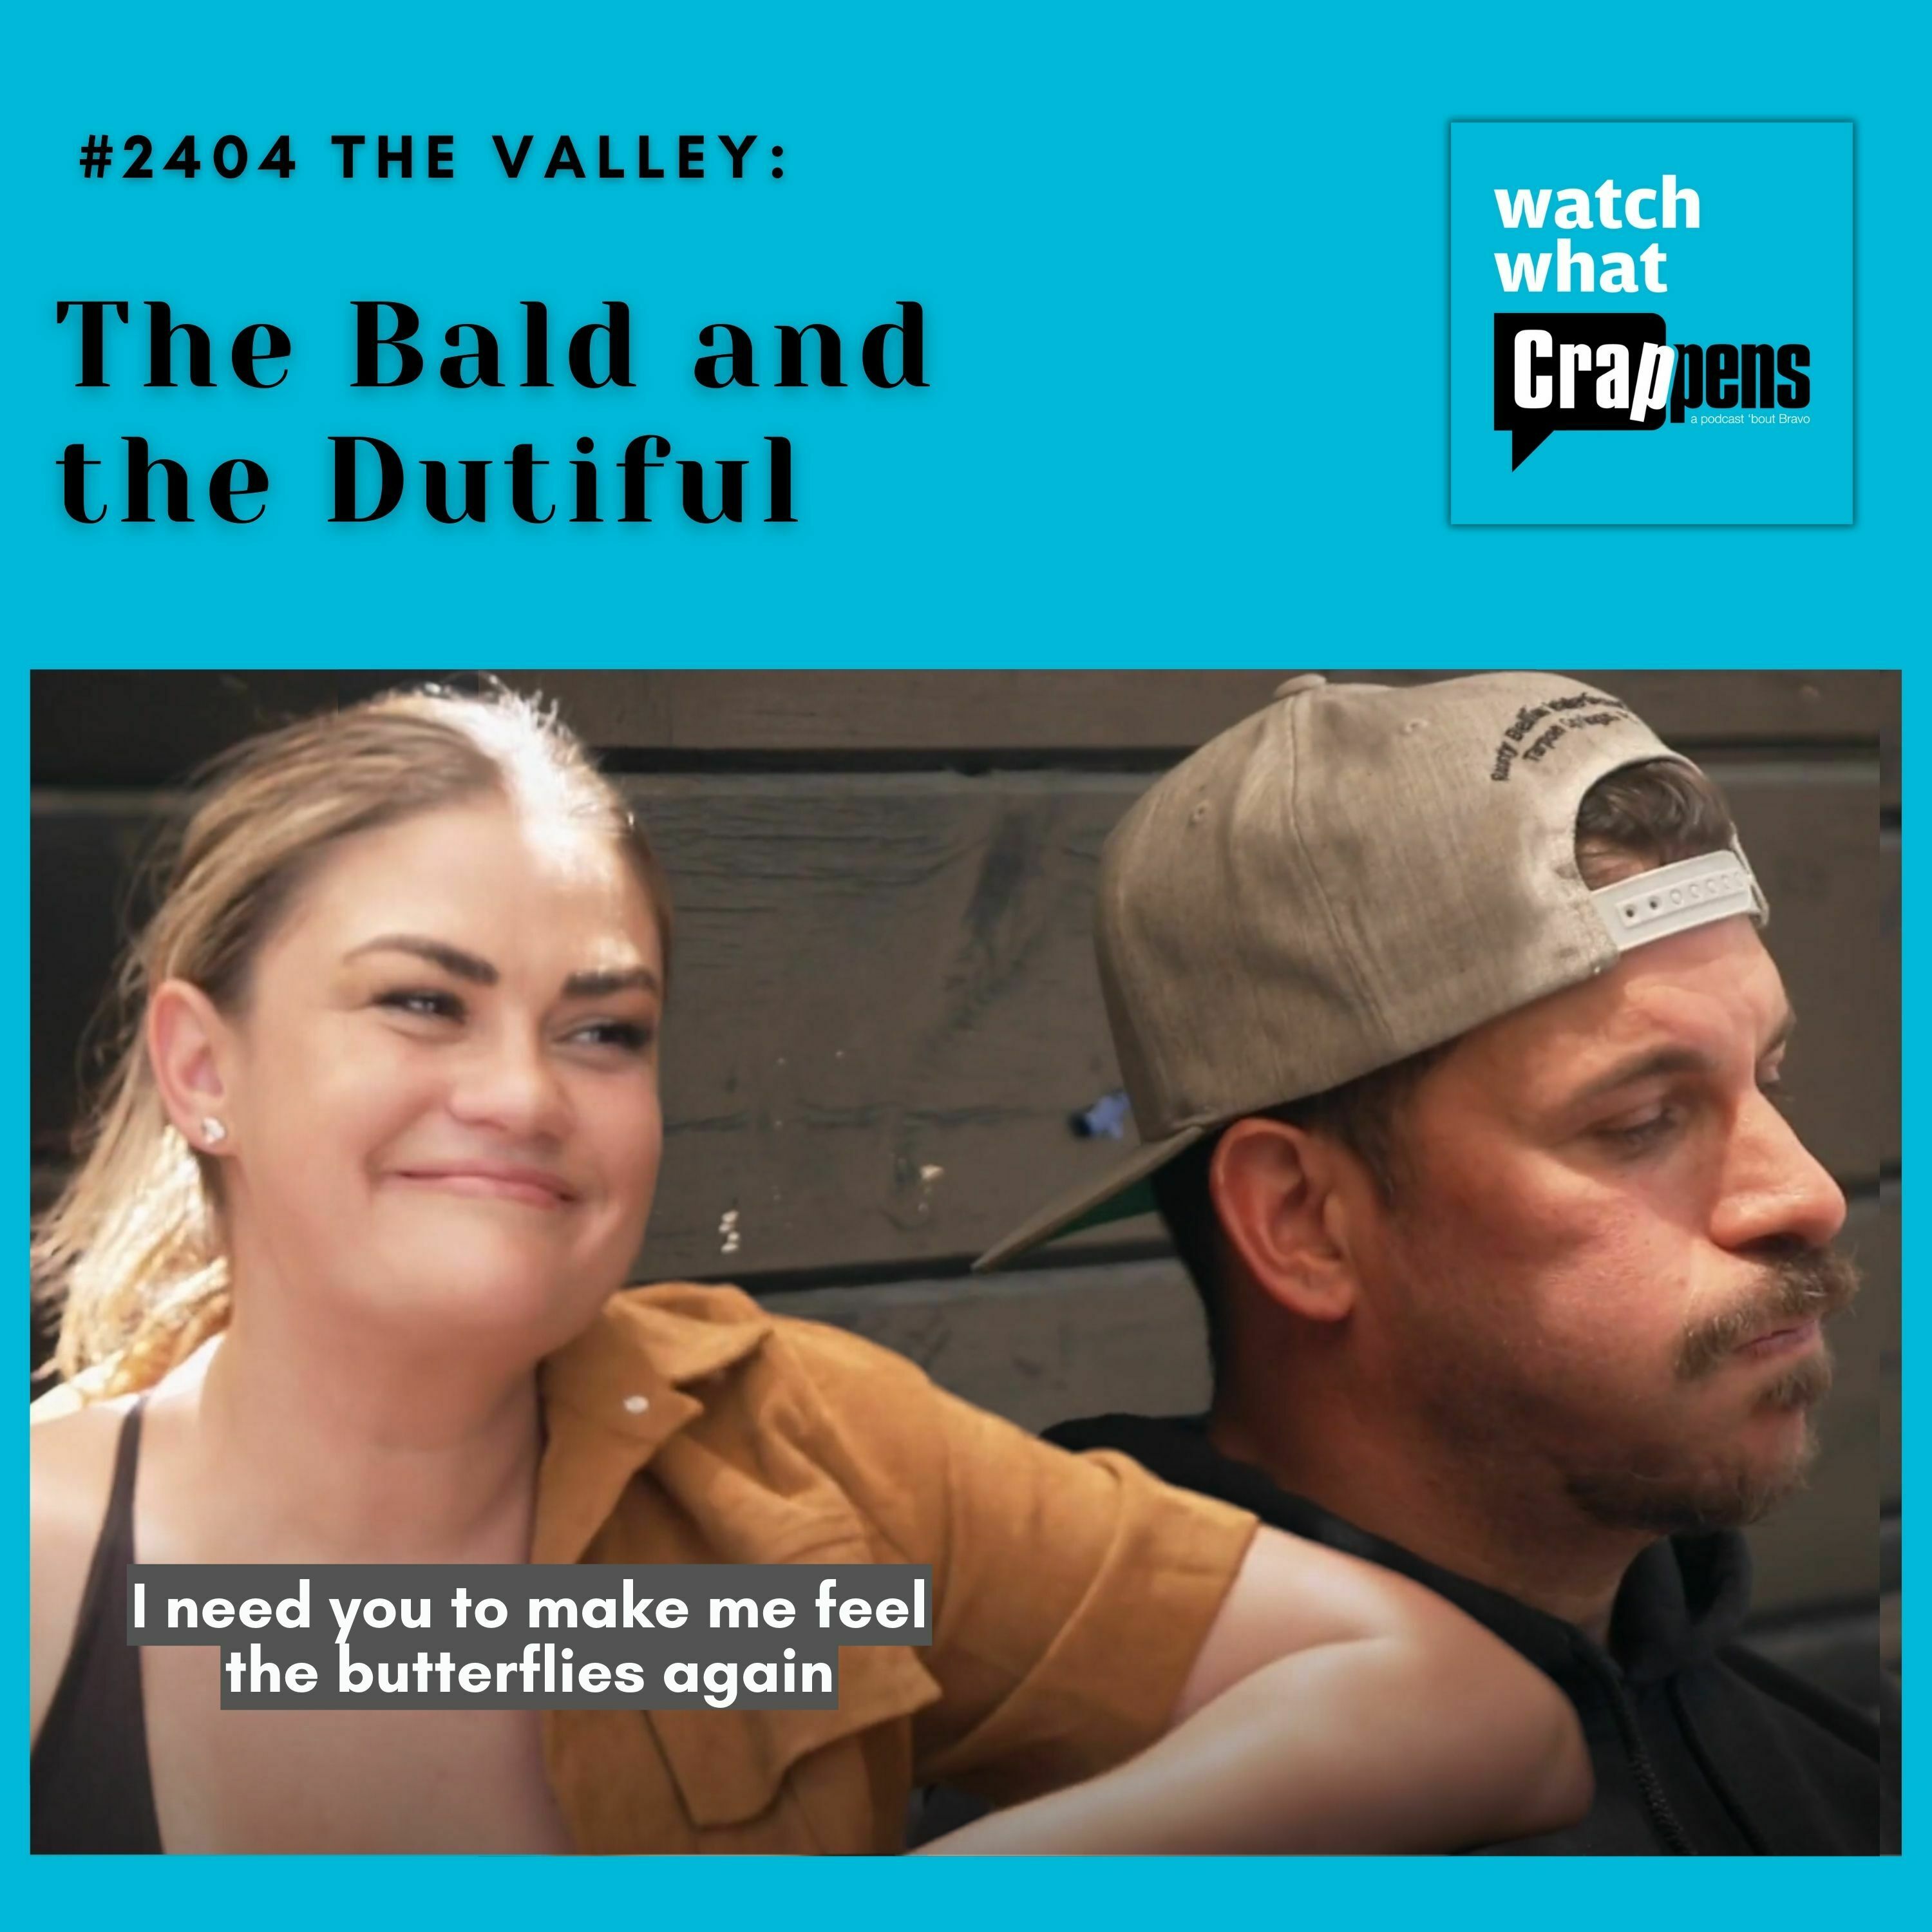 #2404 The Valley,Part 1: The Bald and the Dutiful